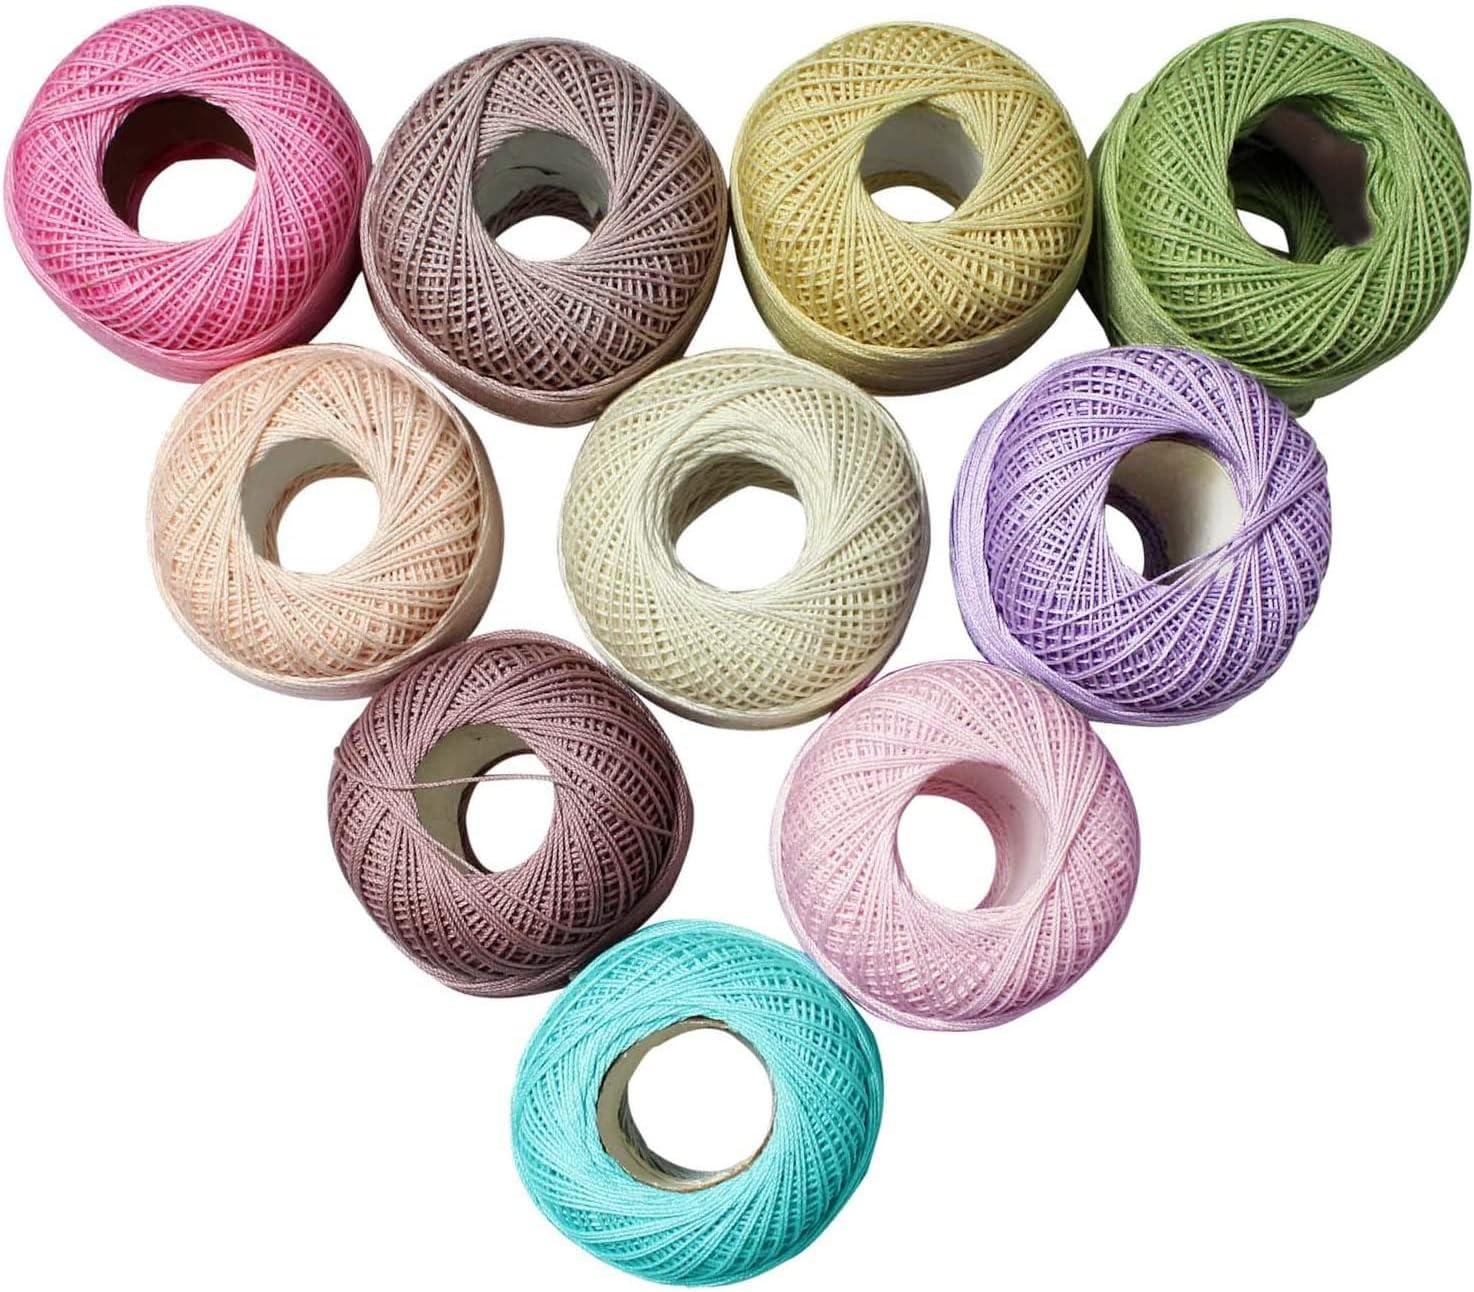 MultiColor Crochet Cotton Yarn for Knitting, Tatting & Embroidery